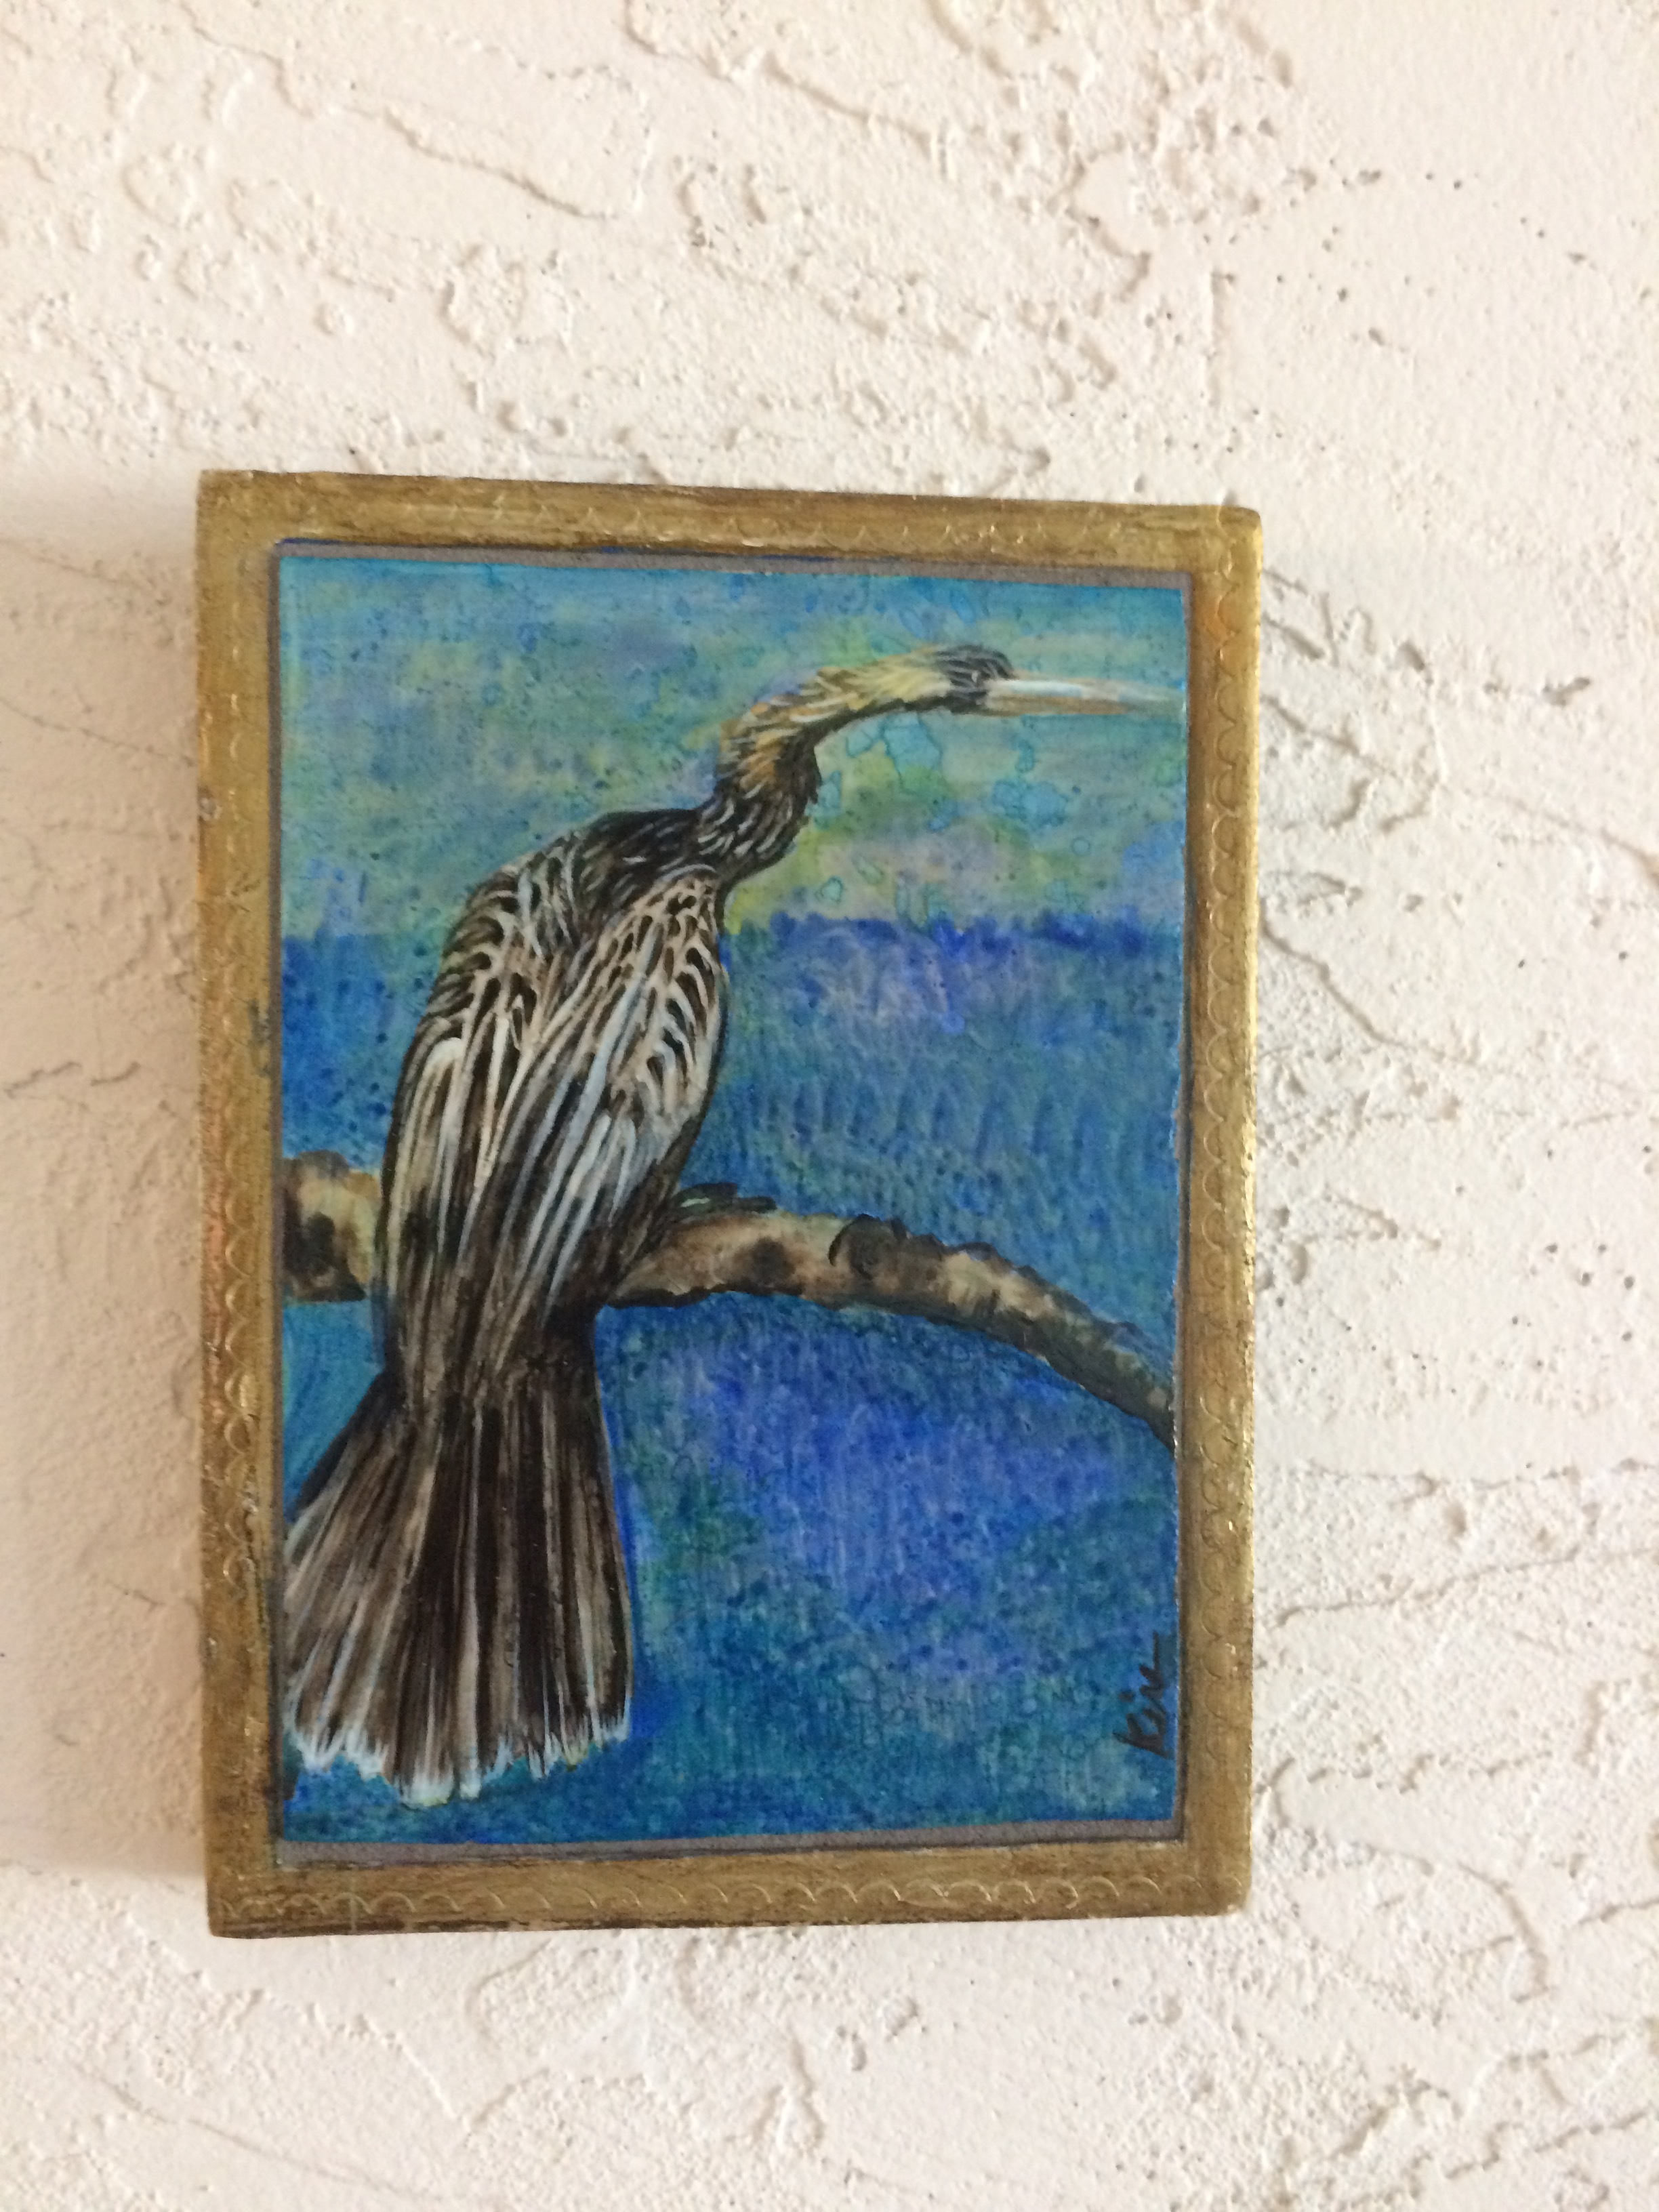 Anhinga, stone painting in vintage gilded Italian box, 5" wide x 7" tall  SOLD